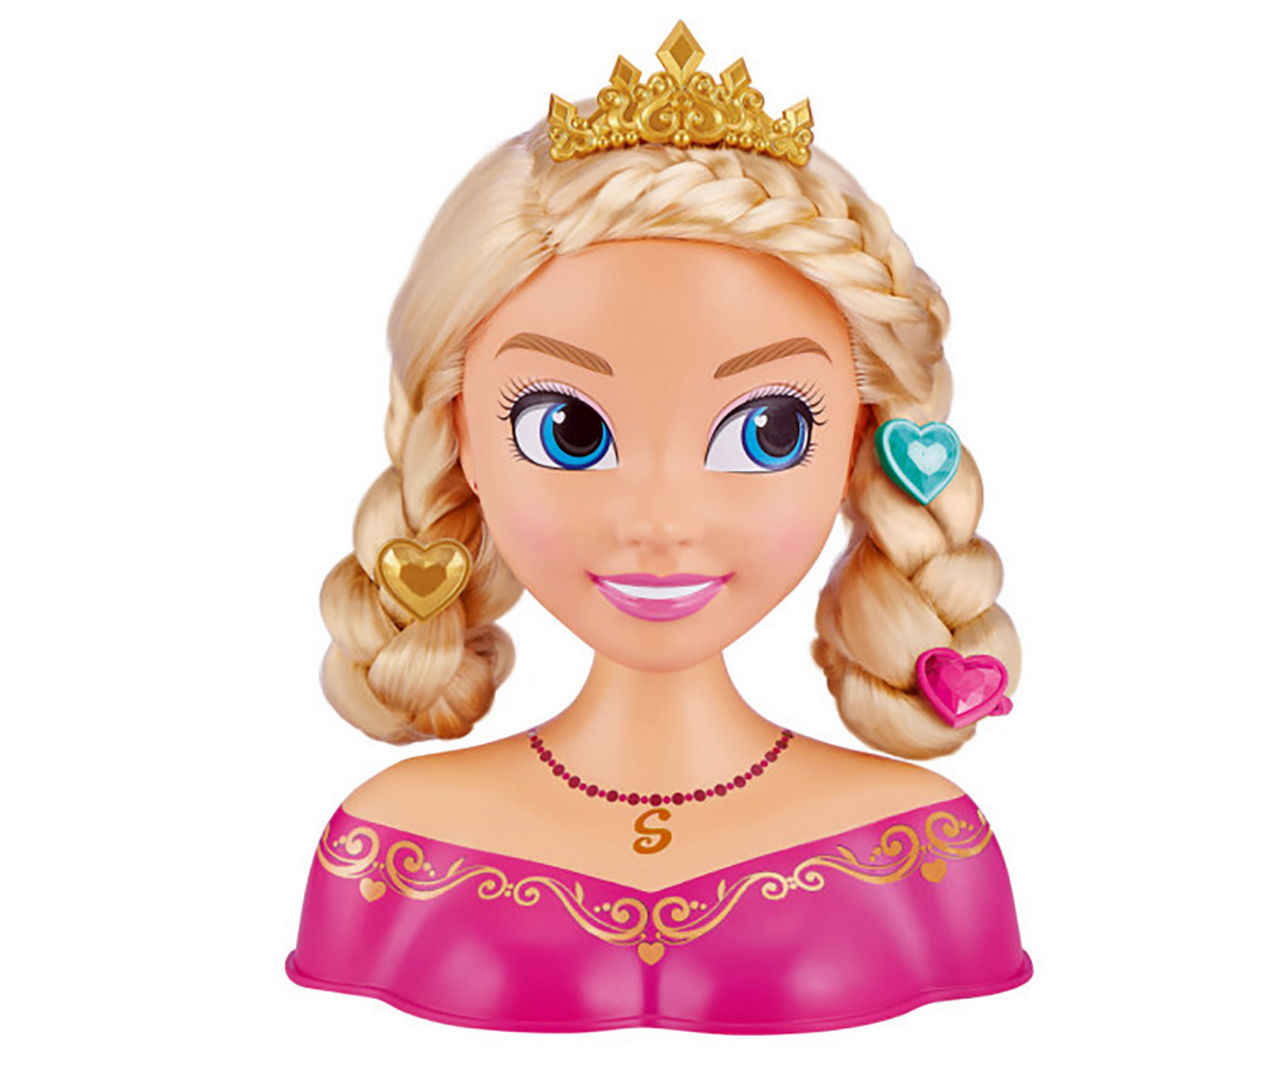 Sparkle Girlz Princess Doll with Sparkly Dress, Long Hair and  Interchangeable Outfit by ZURU Royal Accessories Toys and 18 inch Inches  Fashion Dolls